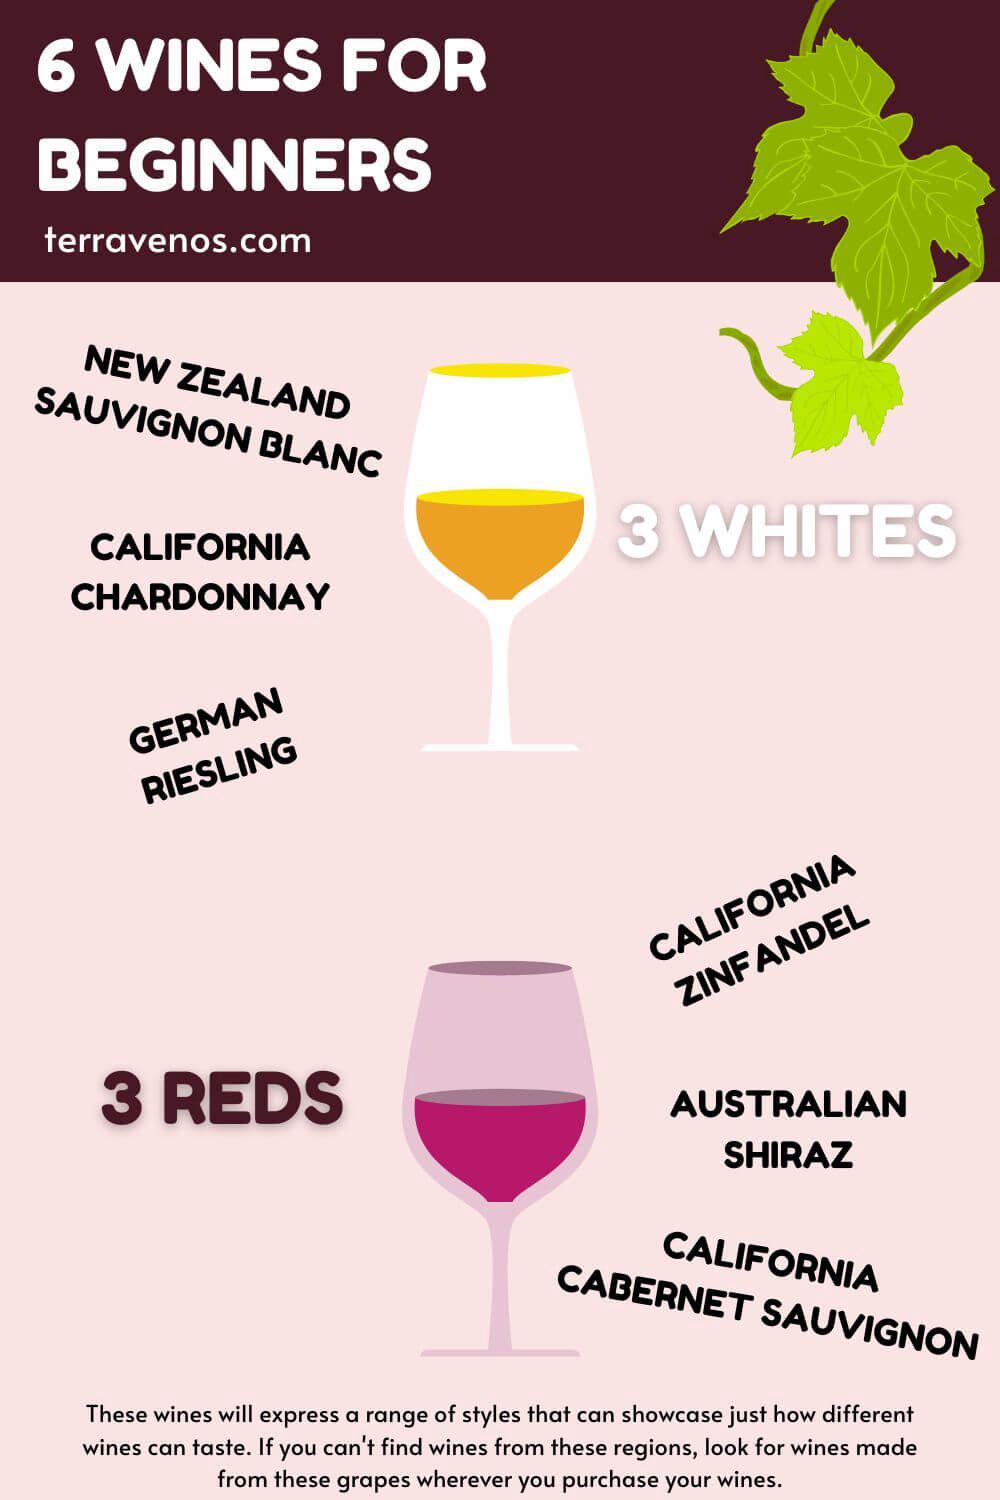 https://terravenos.com/wp-content/uploads/2023/09/wines-for-beginners-infographic.jpg?ezimgfmt=rs%3Adevice%2Frscb1-2